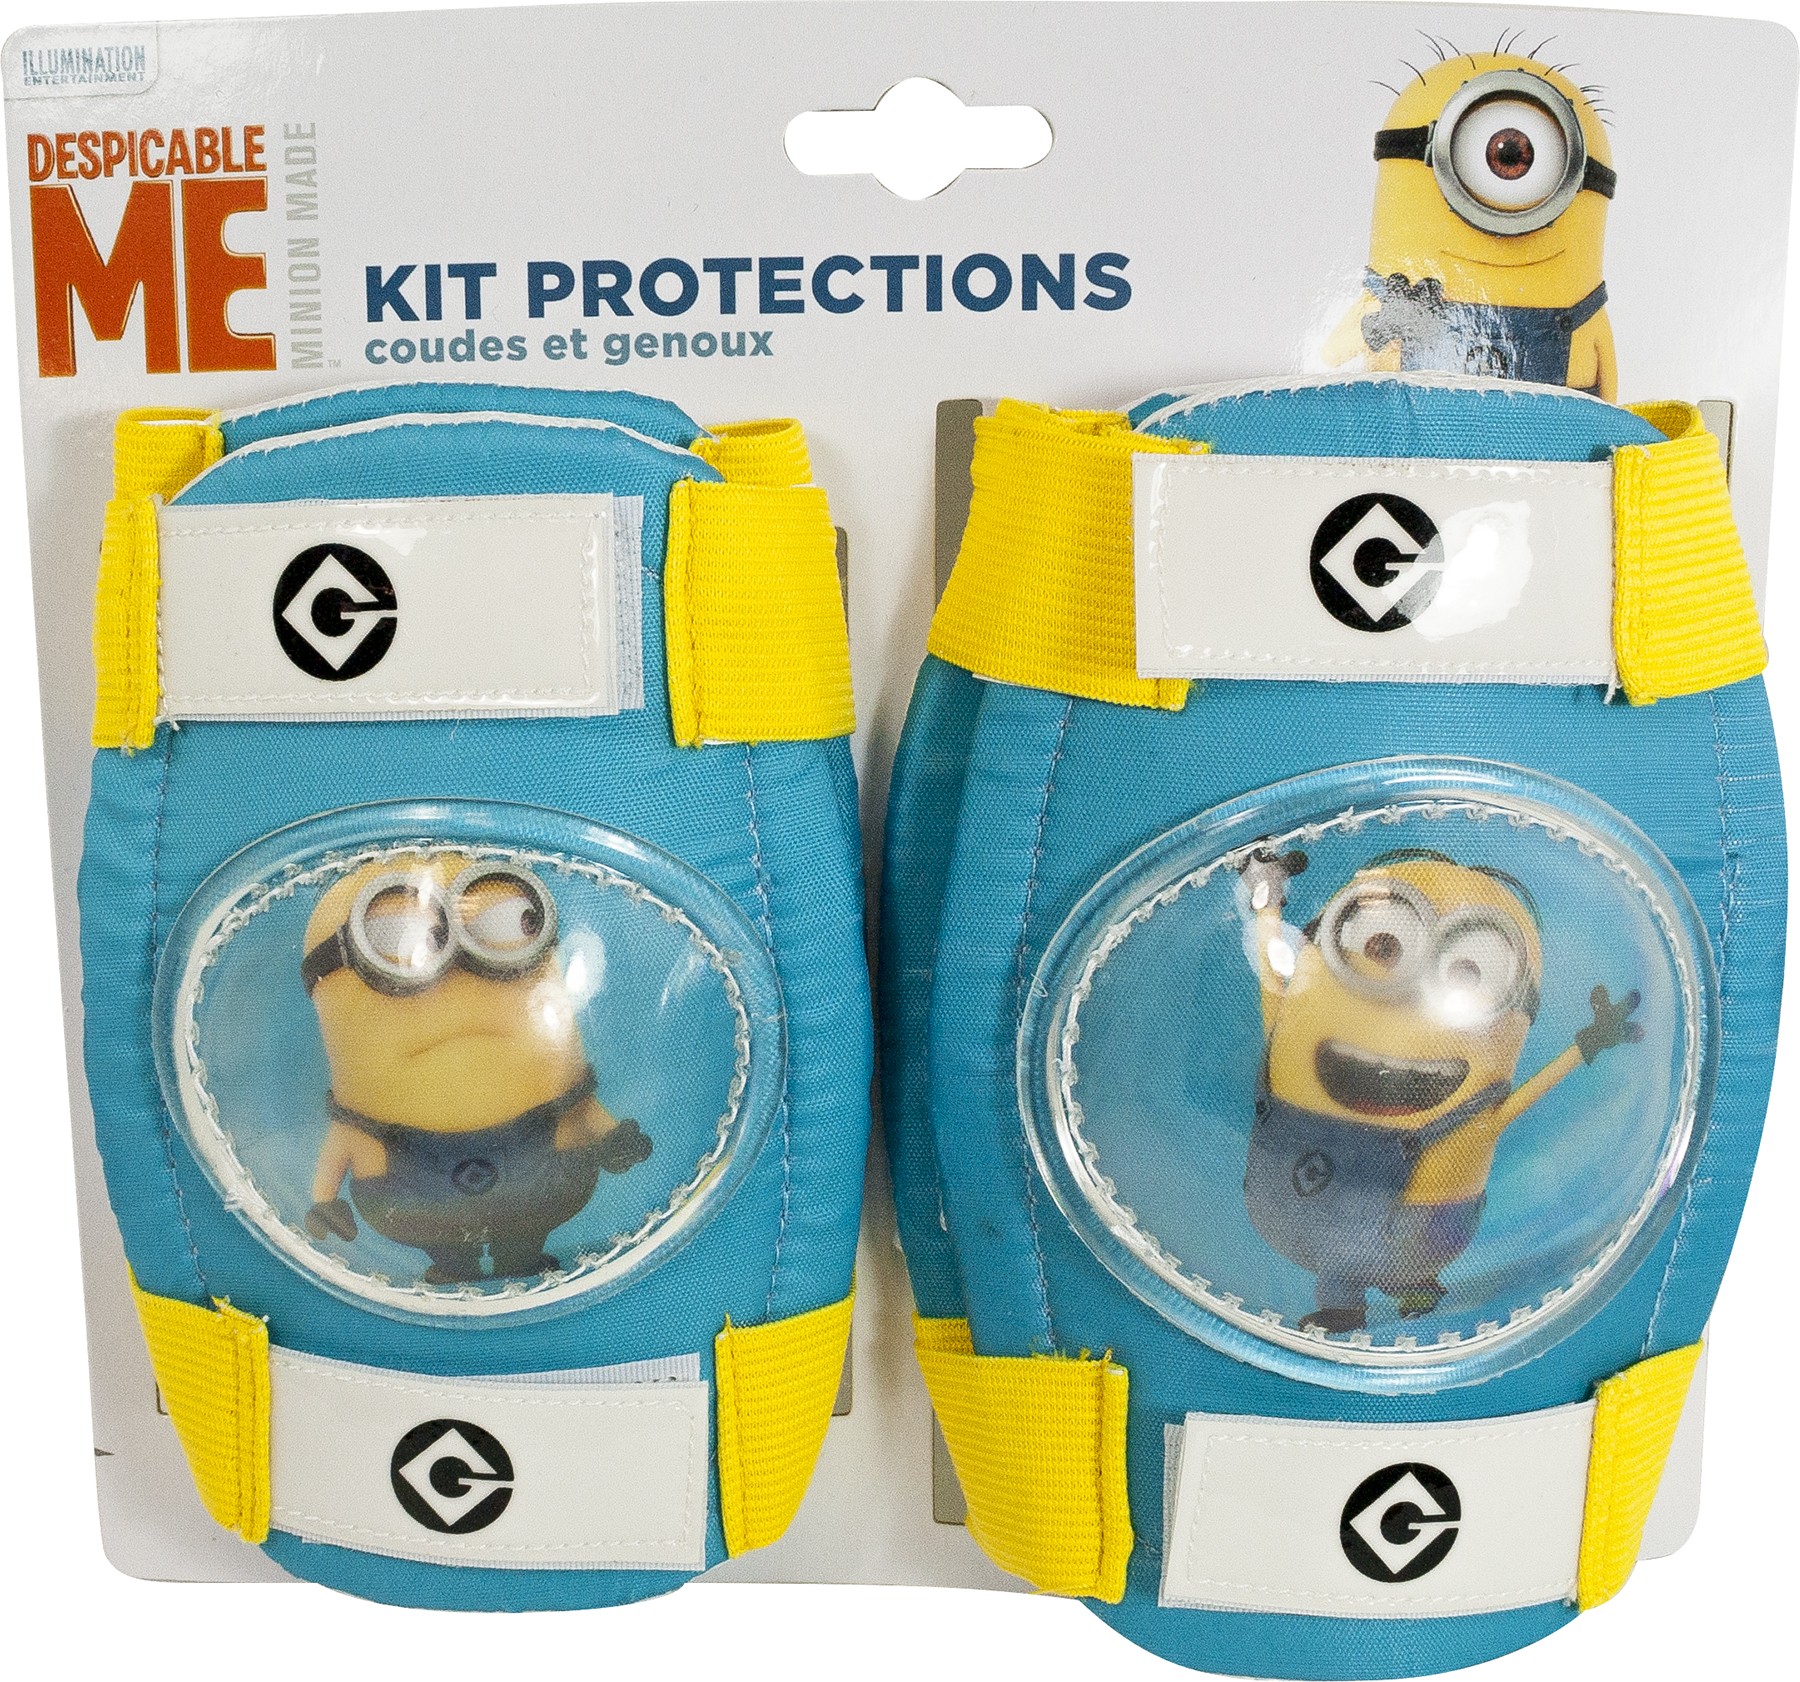 Protections Minions genou/coud